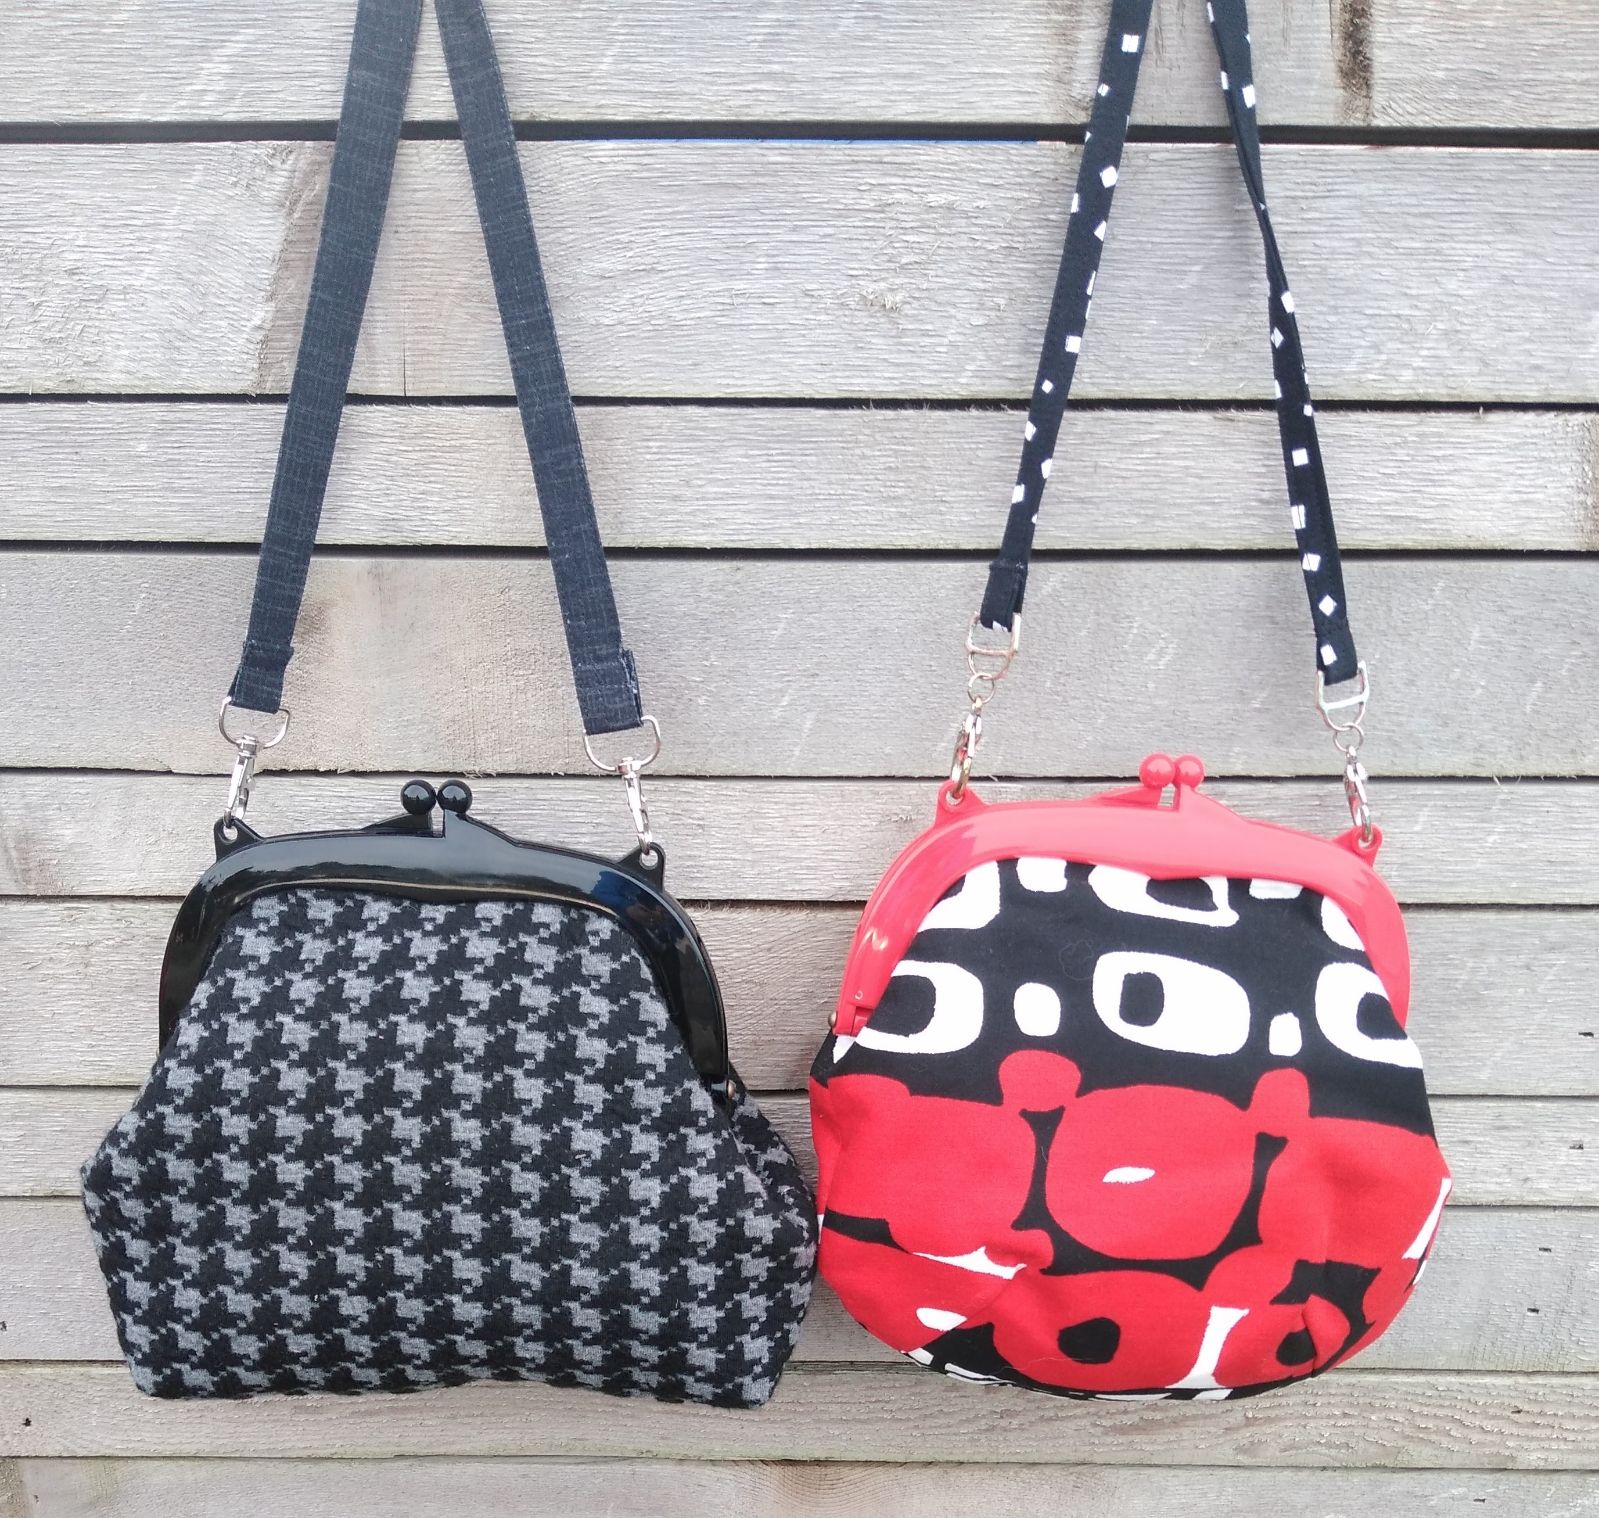 Bag Closures - The Sewing Directory